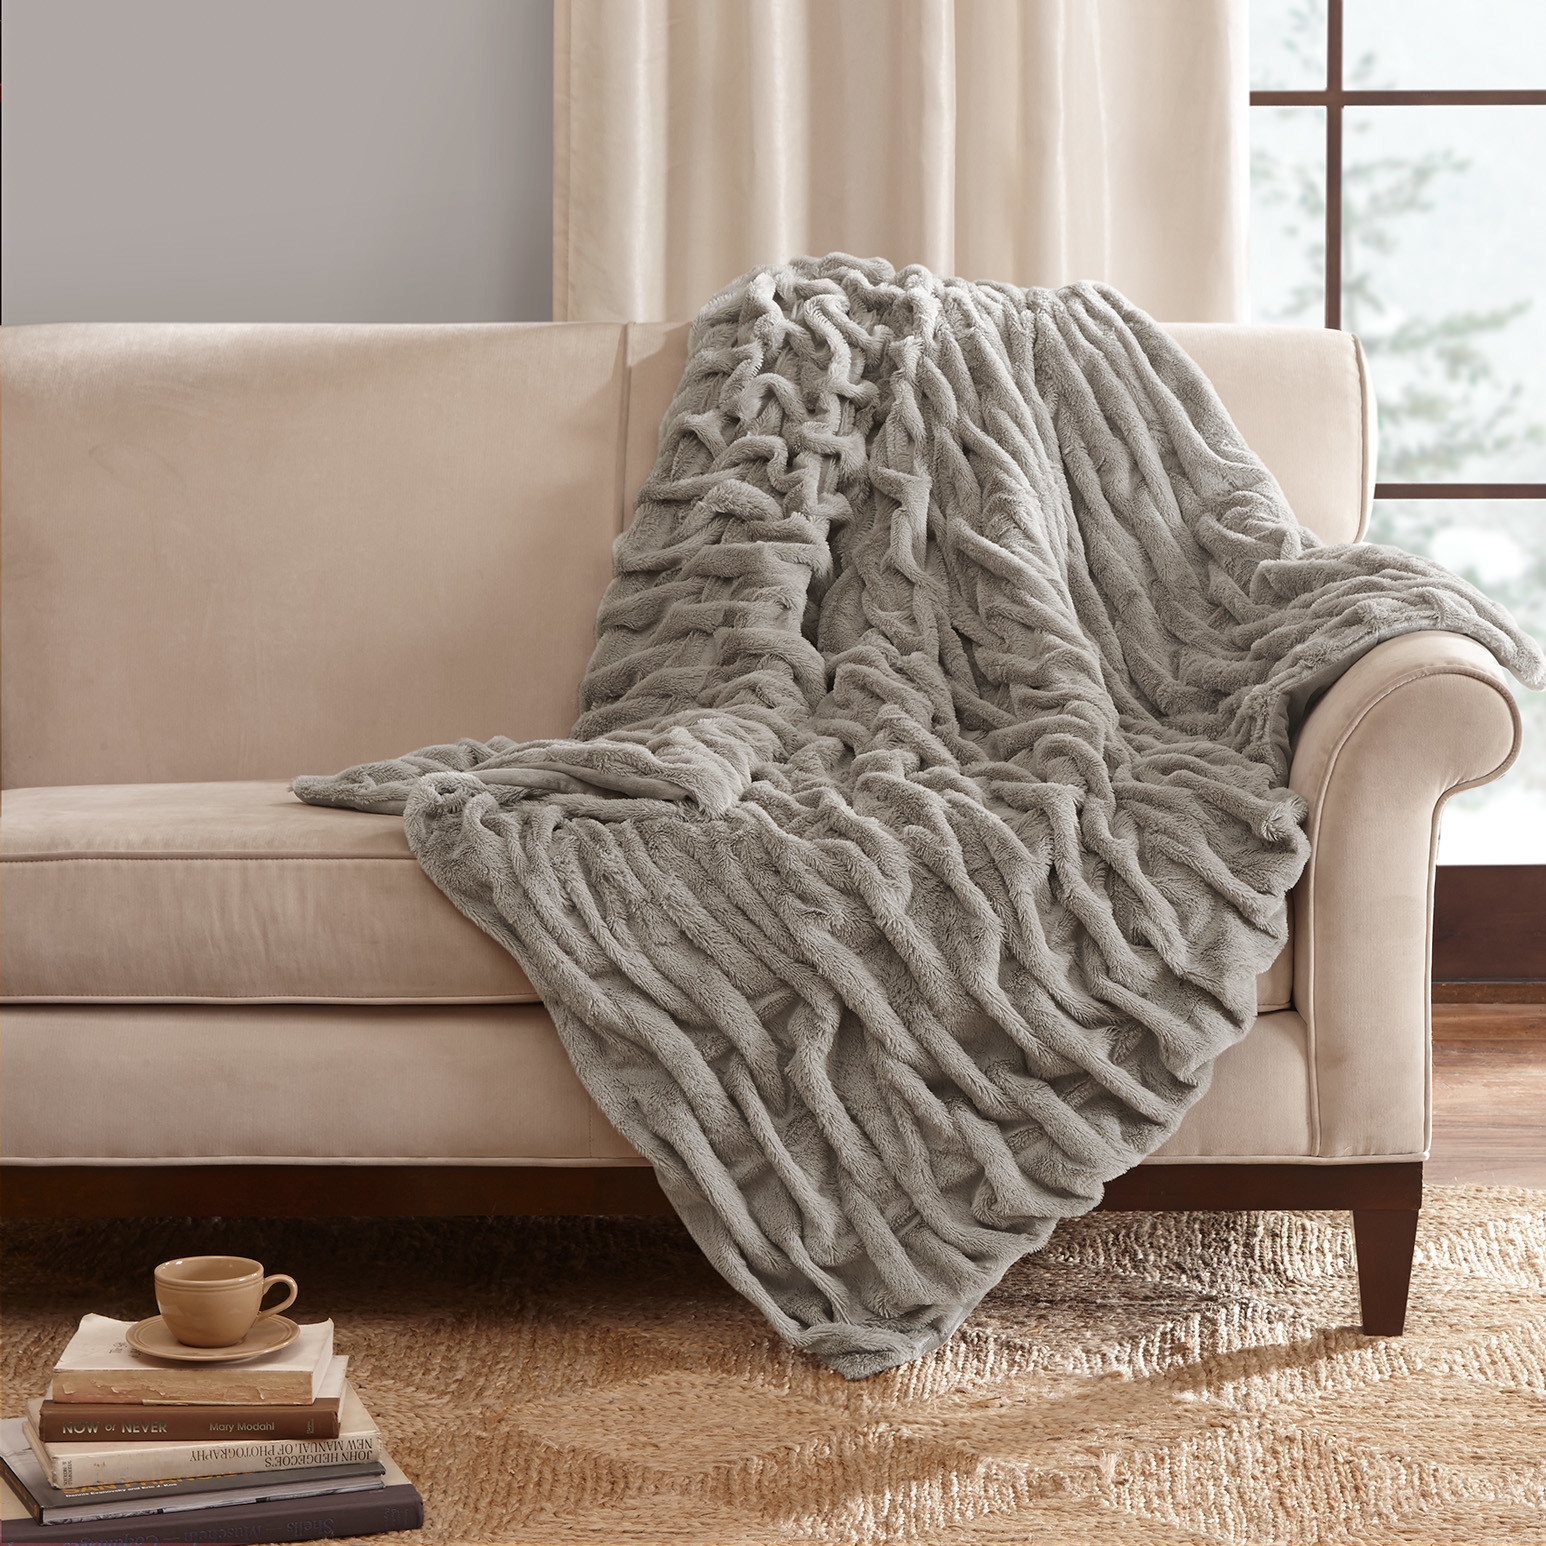 Ruched Fur Throw Blanket - Gray - Image 1